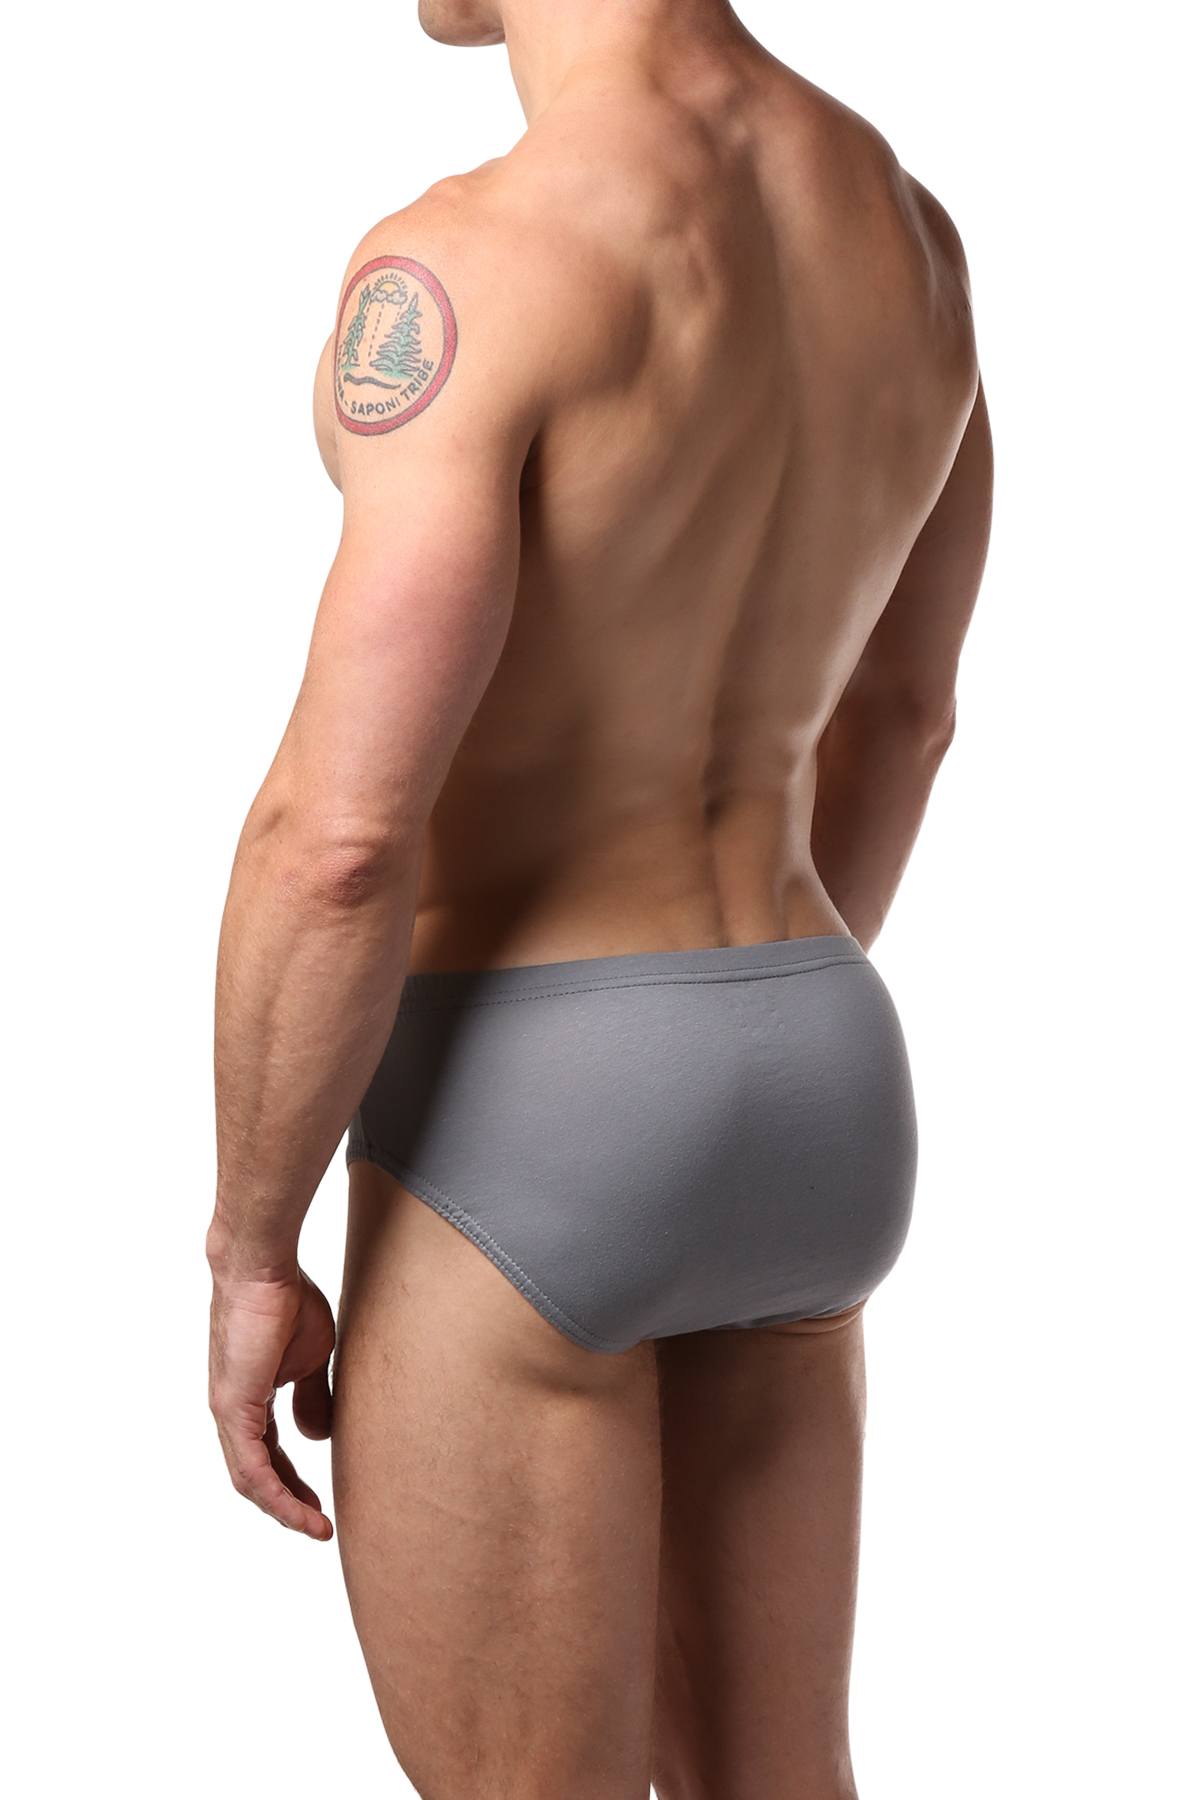 Papi Yellow/Turquoise/Navy/Grey/Black Low-Rise Brief 5-Pack